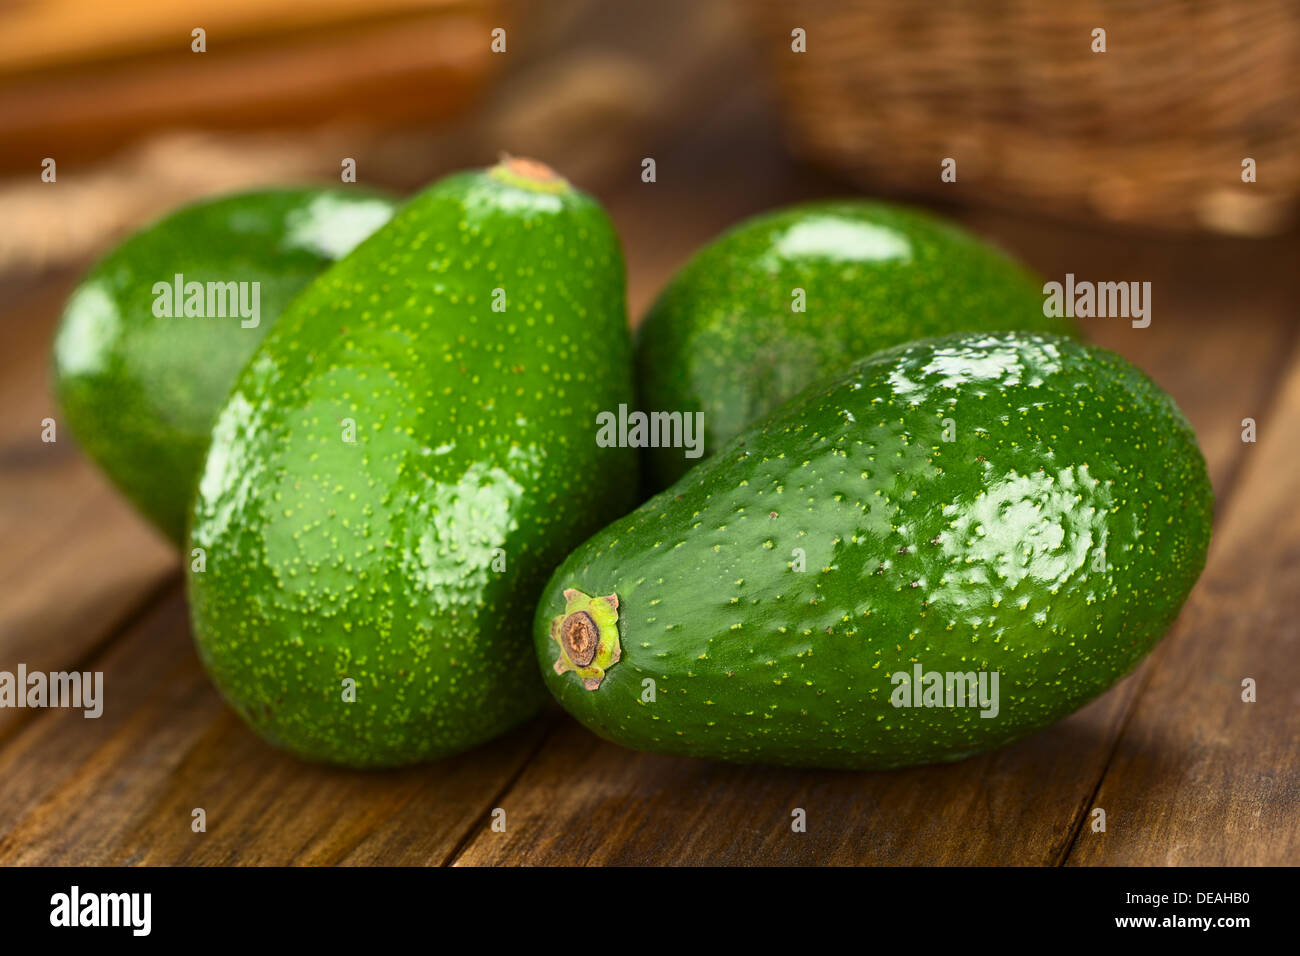 Four Avocados Fuerte on dark wood (Selective Focus, Focus on the front) Stock Photo